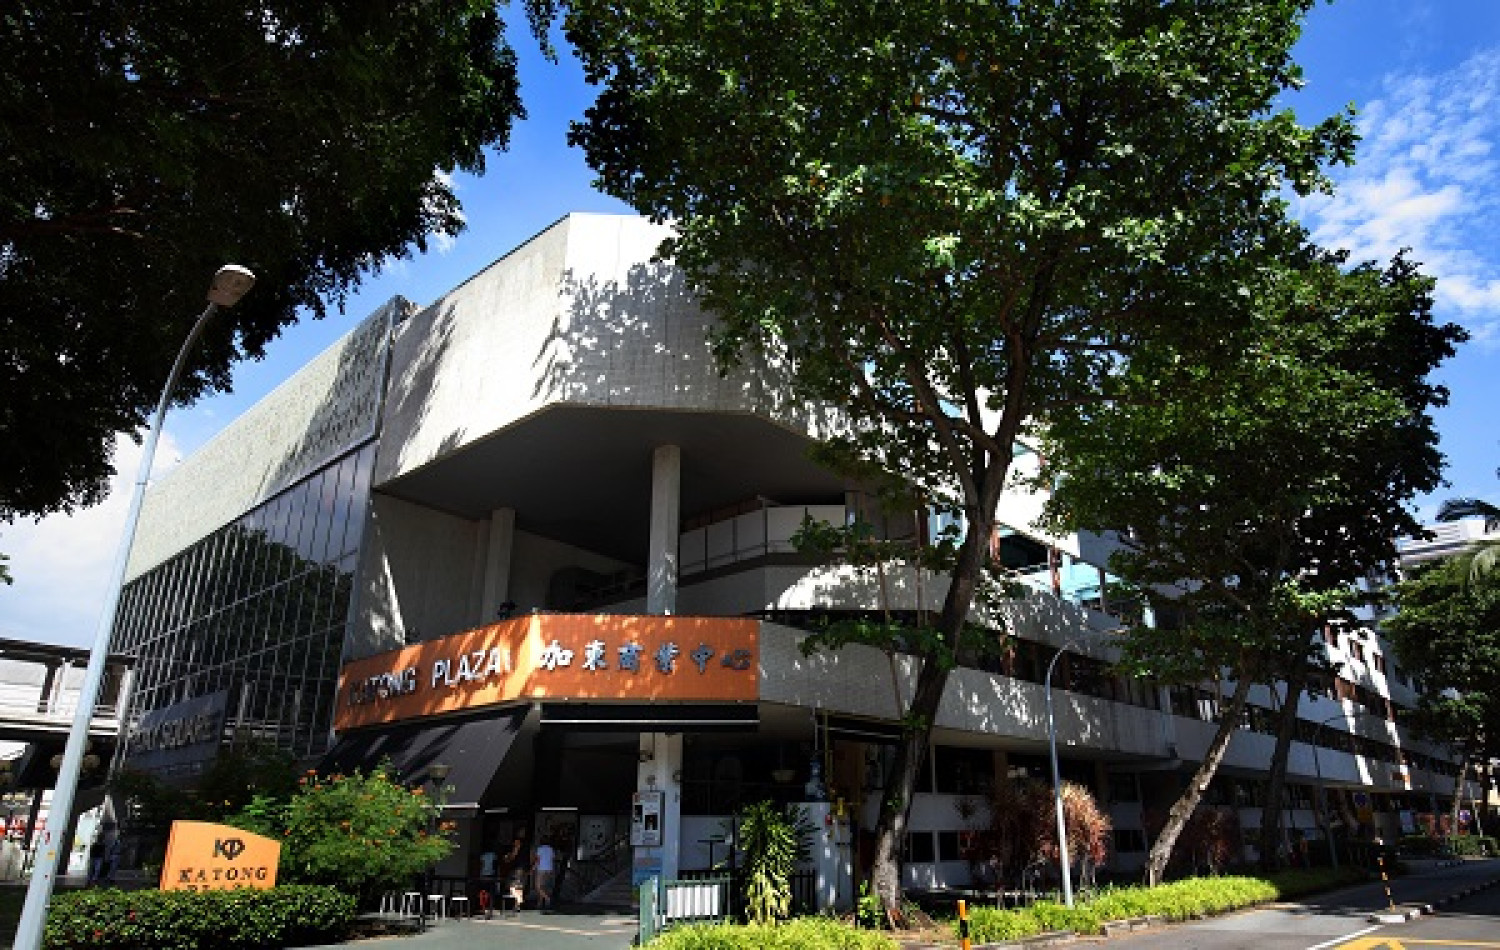 [UPDATE] Katong Plaza launches third collective sale attempt at $188 mil - Property News